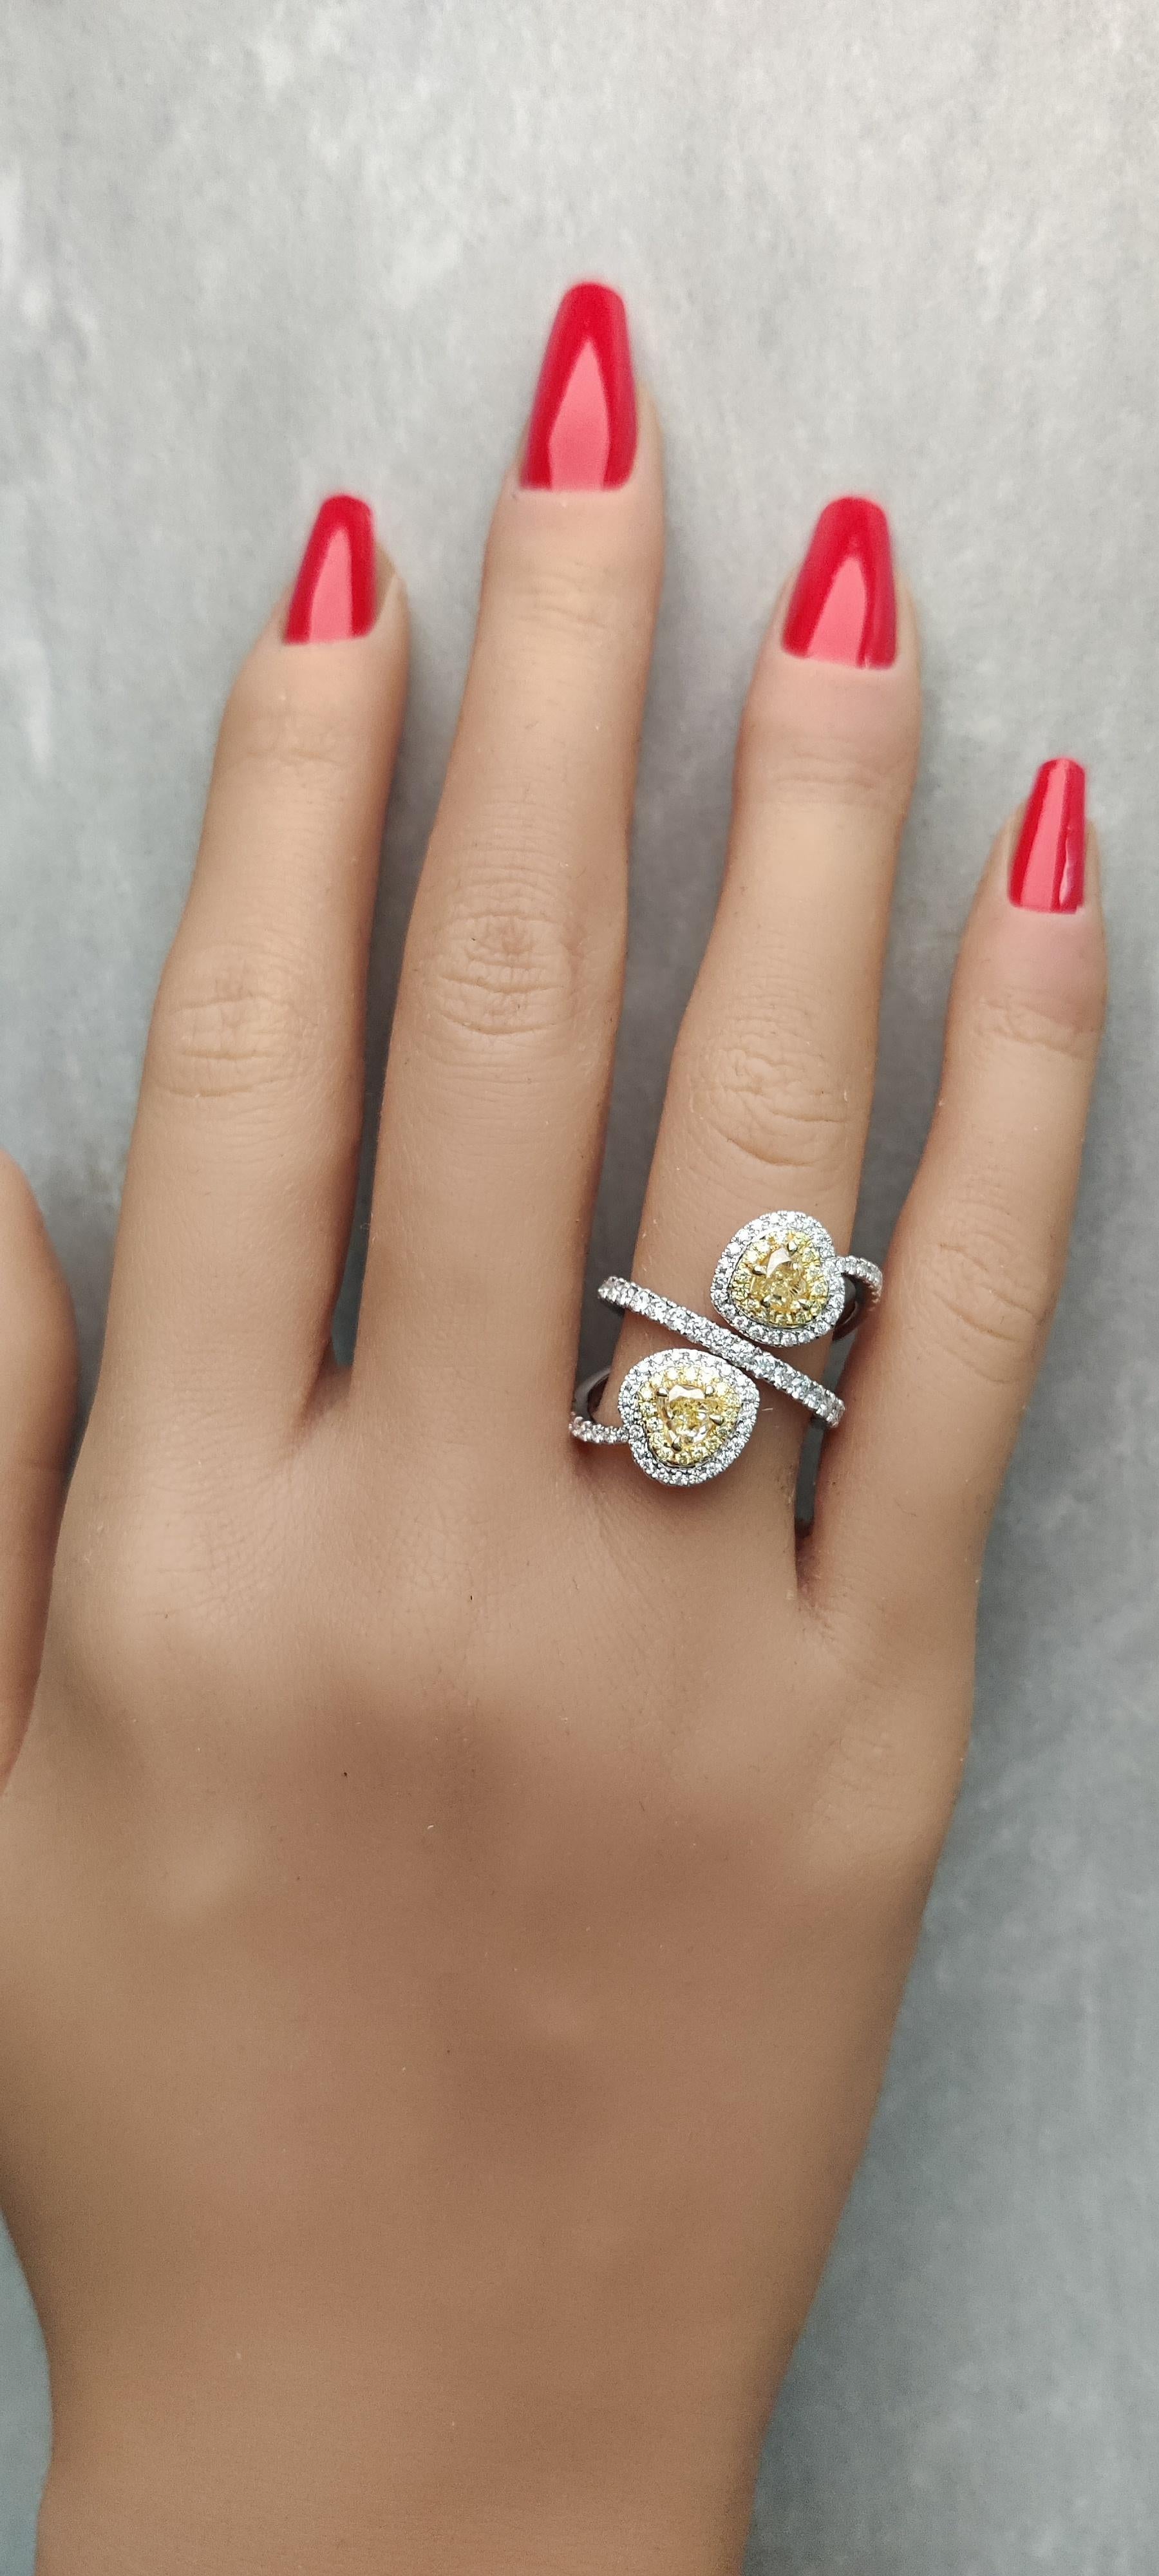 RareGemWorld's classic GIA certified diamond ring. Mounted in a beautiful 18K Yellow and White setting with two natural heart cut yellow diamonds. The yellow diamonds are surrounded by round natural white diamond melee and round natural yellow